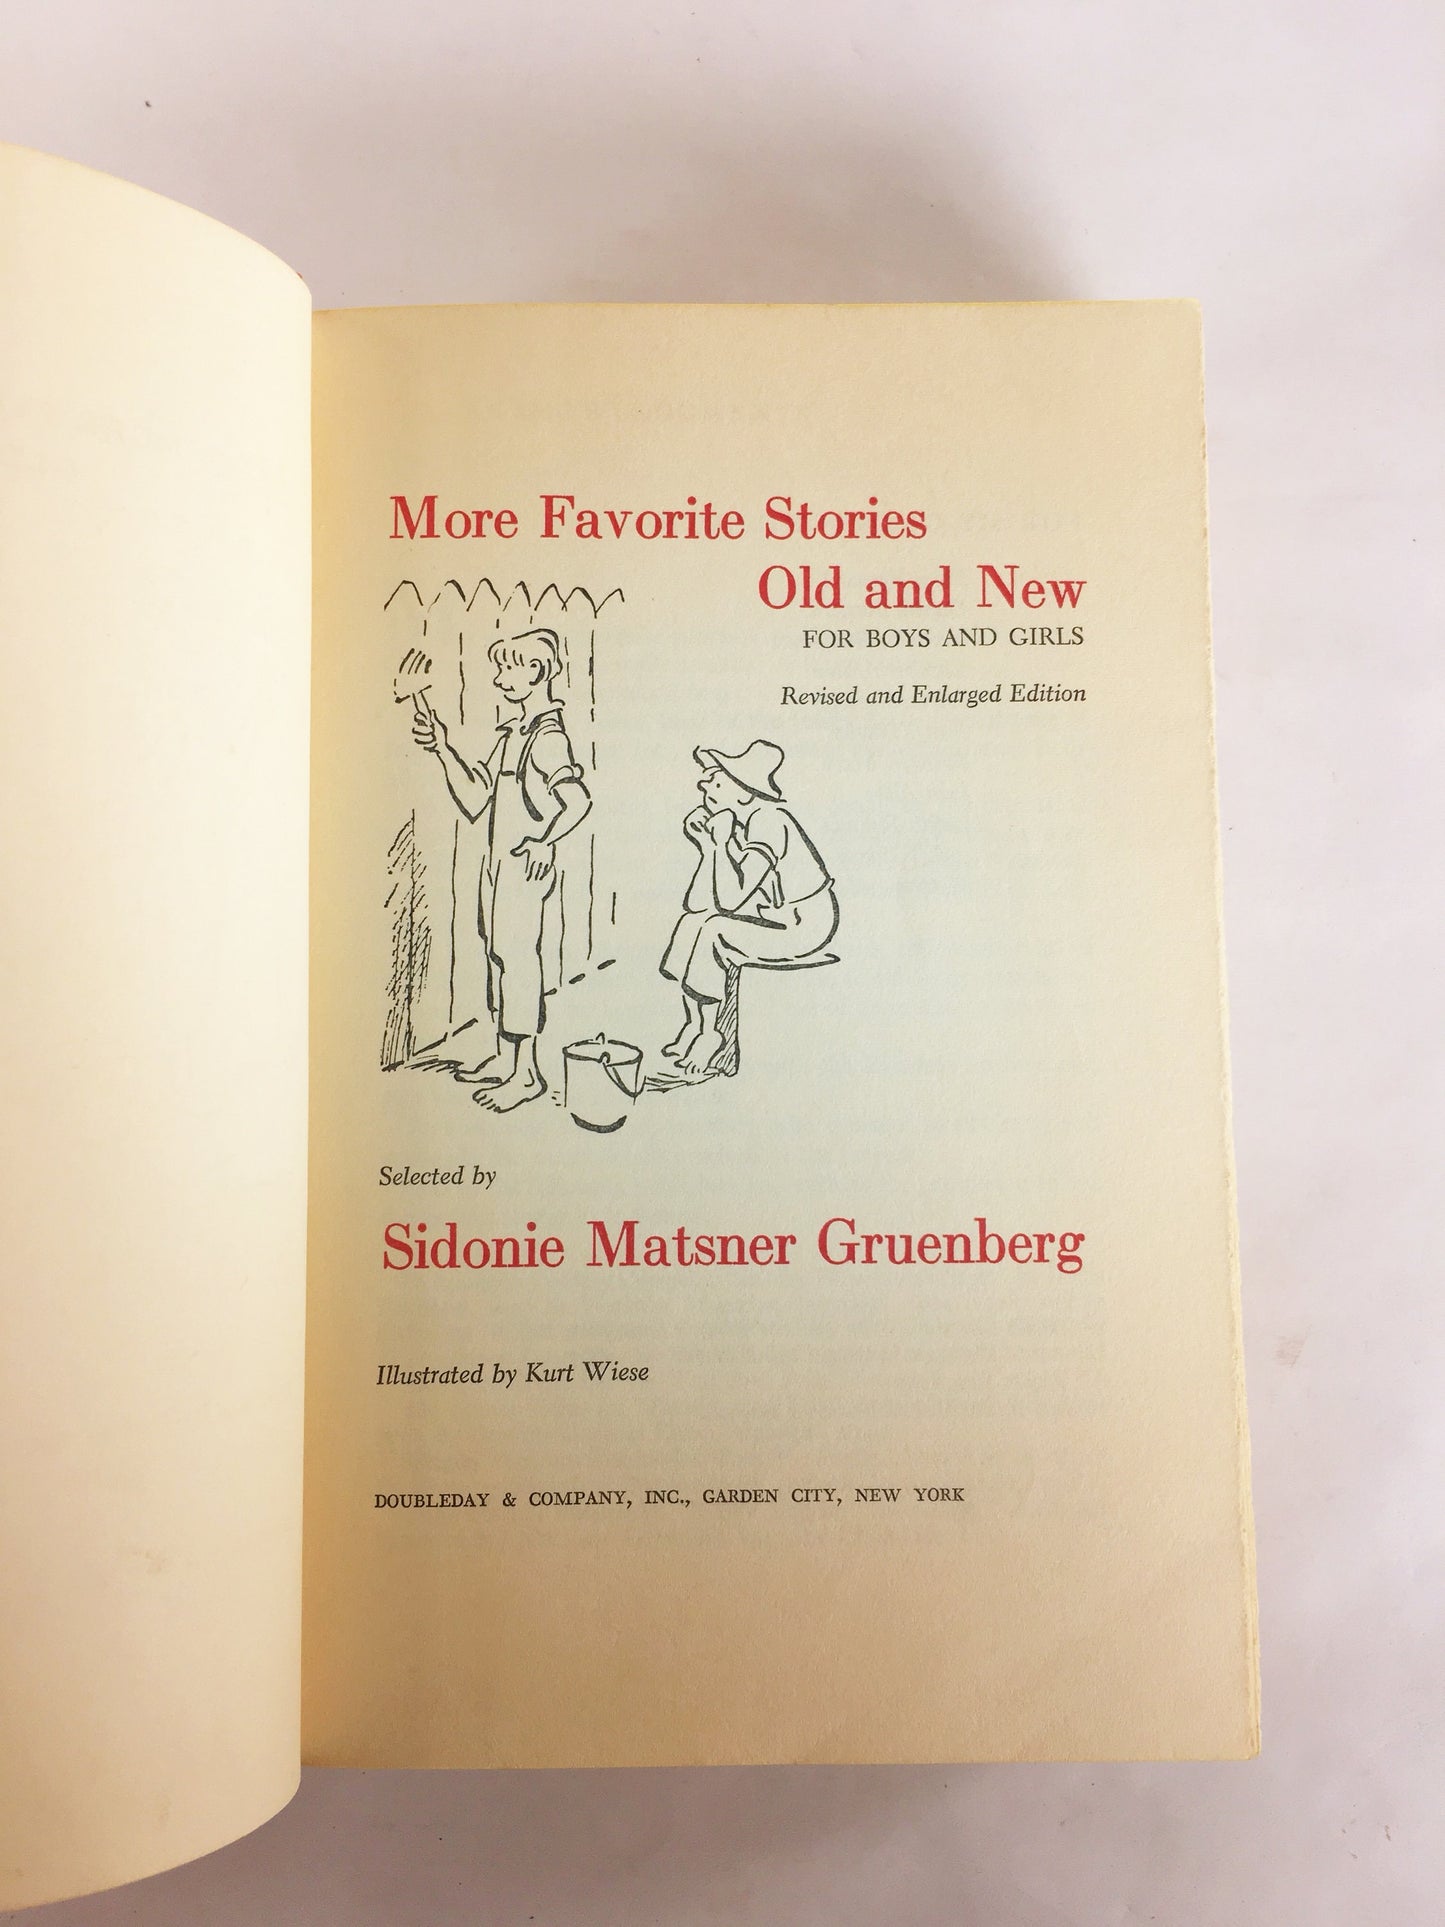 1960 Favorite Stories for Boys & Girls vintage children's book by Sidonie Matsner Gruenberg, author of Wonderful Story of How You Were Born